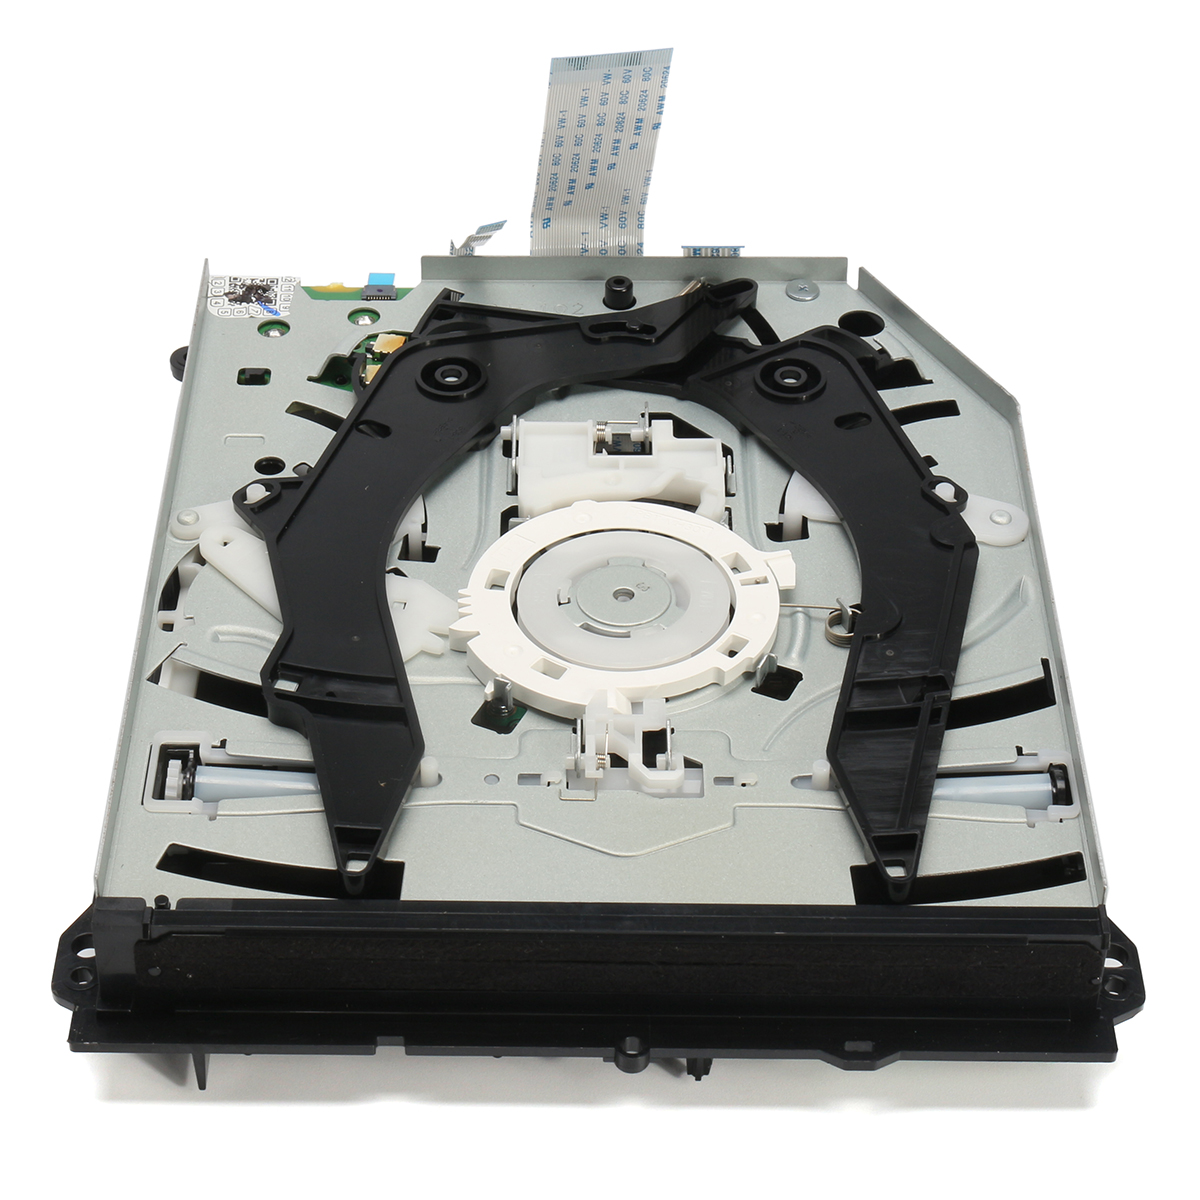 Blu-ray-Disk-CD-Drive-Replacement-Part-for-Sony-PS4-CUH-1215A-CUH-1215B-500GB-1TB-1332338-4